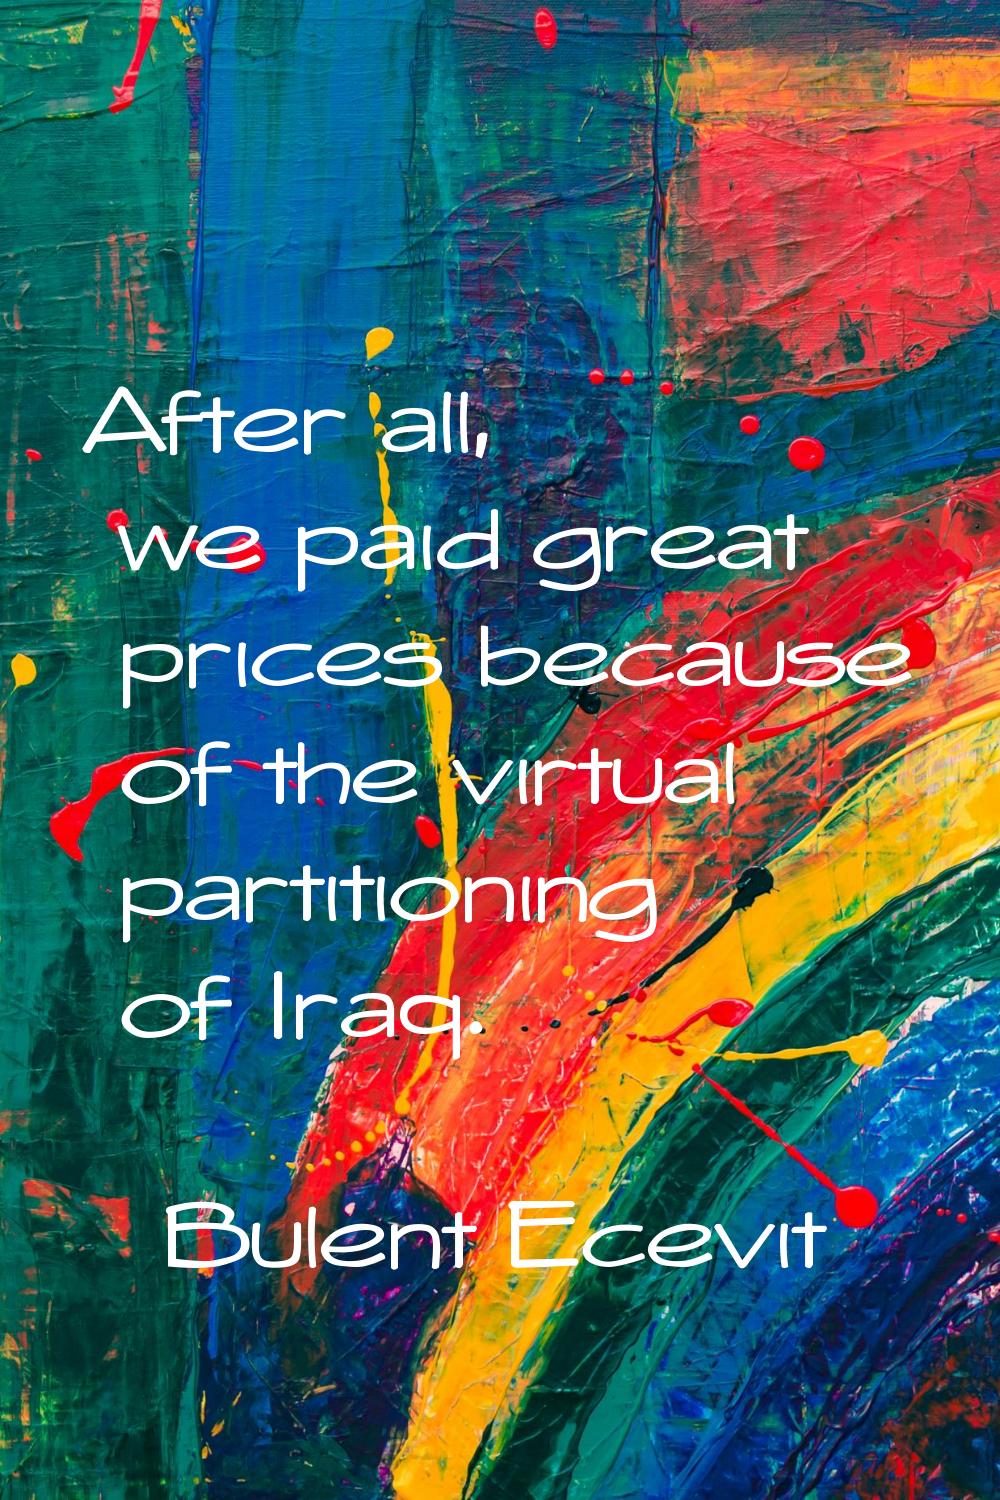 After all, we paid great prices because of the virtual partitioning of Iraq.